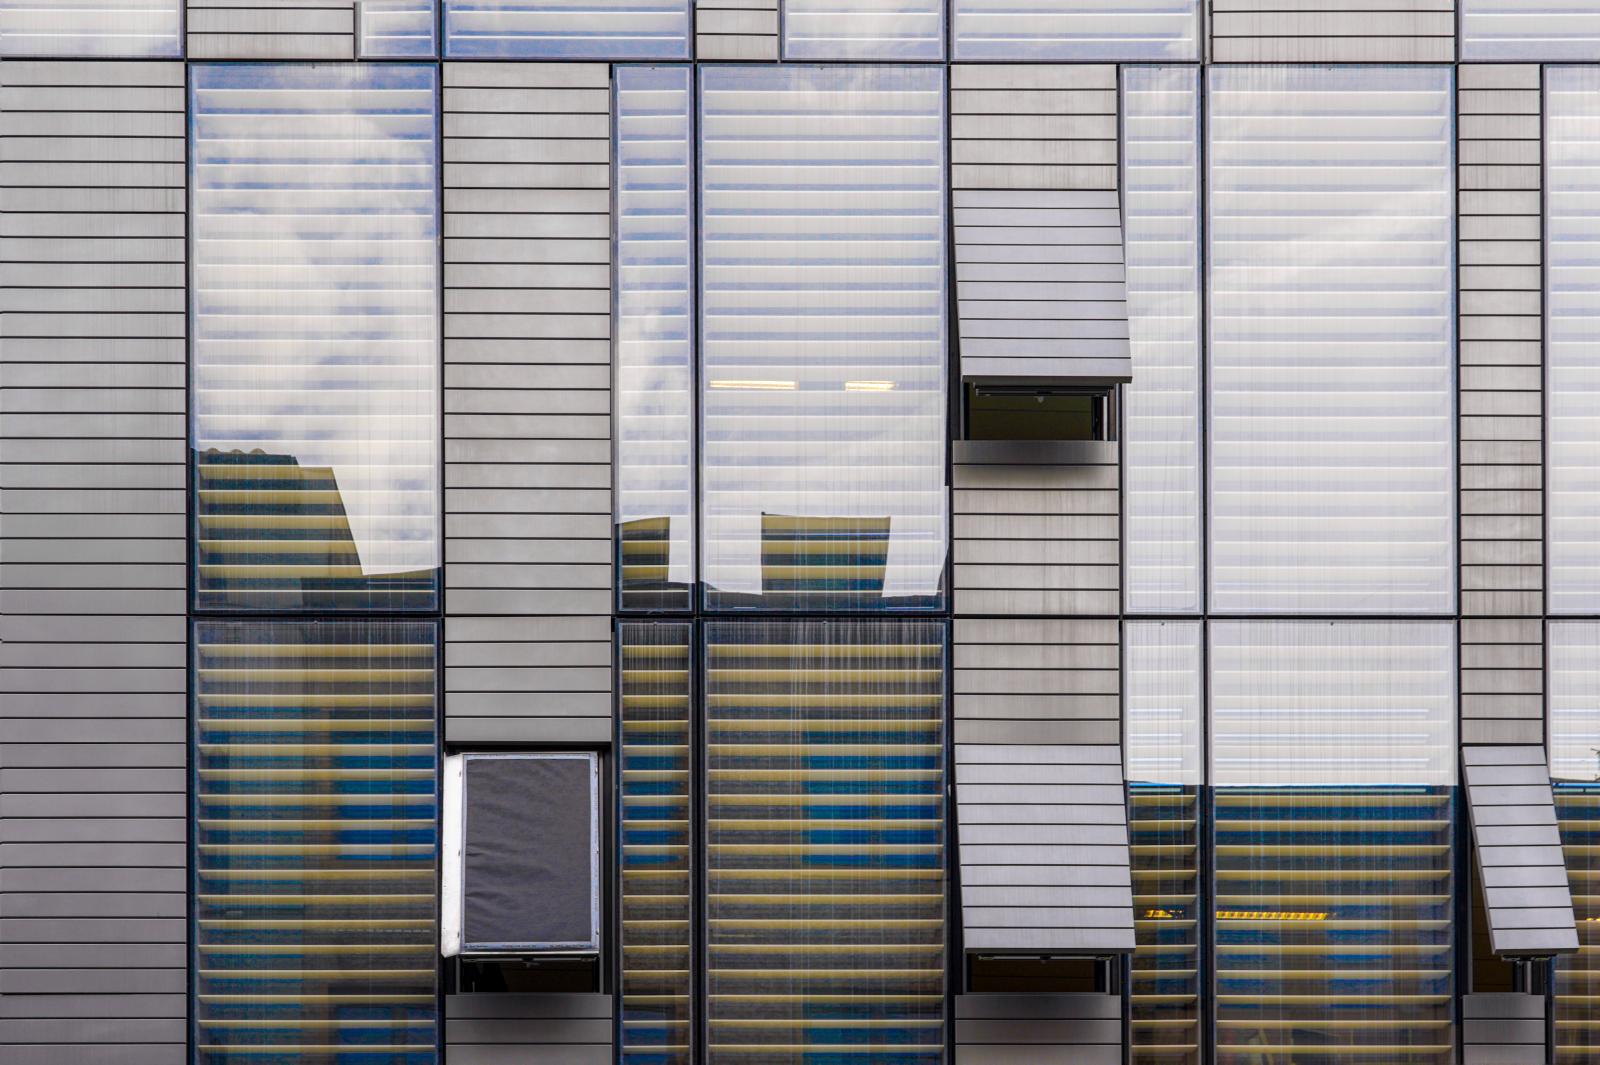 Image from New Photographs -  Lyon, France  # 4277 4/2024 Urban Reflections: The Fluid...